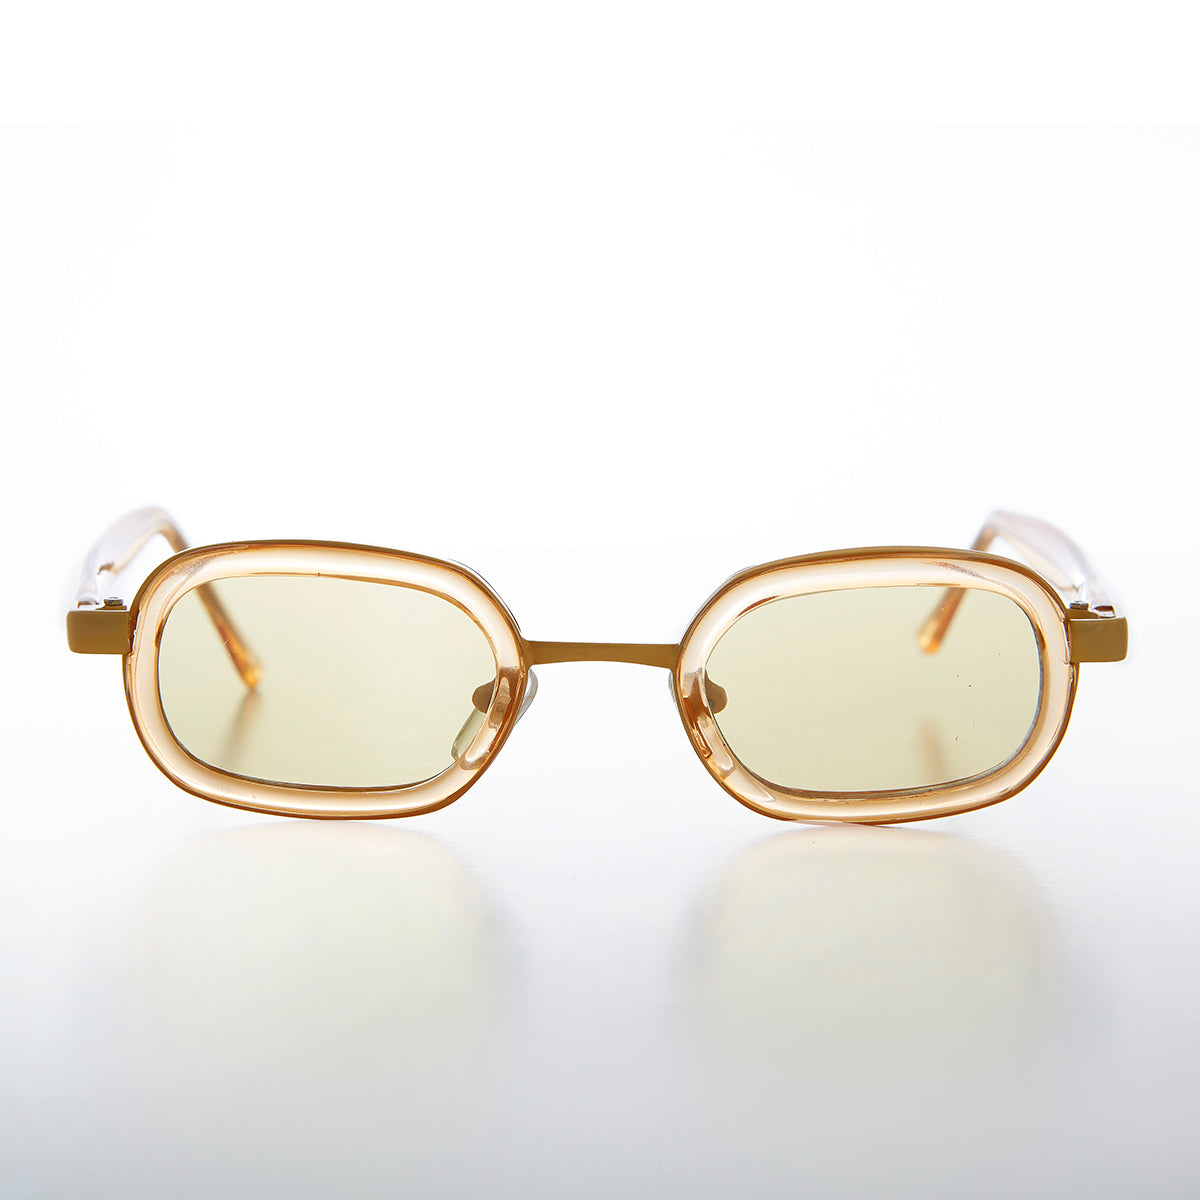 Translucent Colored Small Vintage Sunglass - Berry